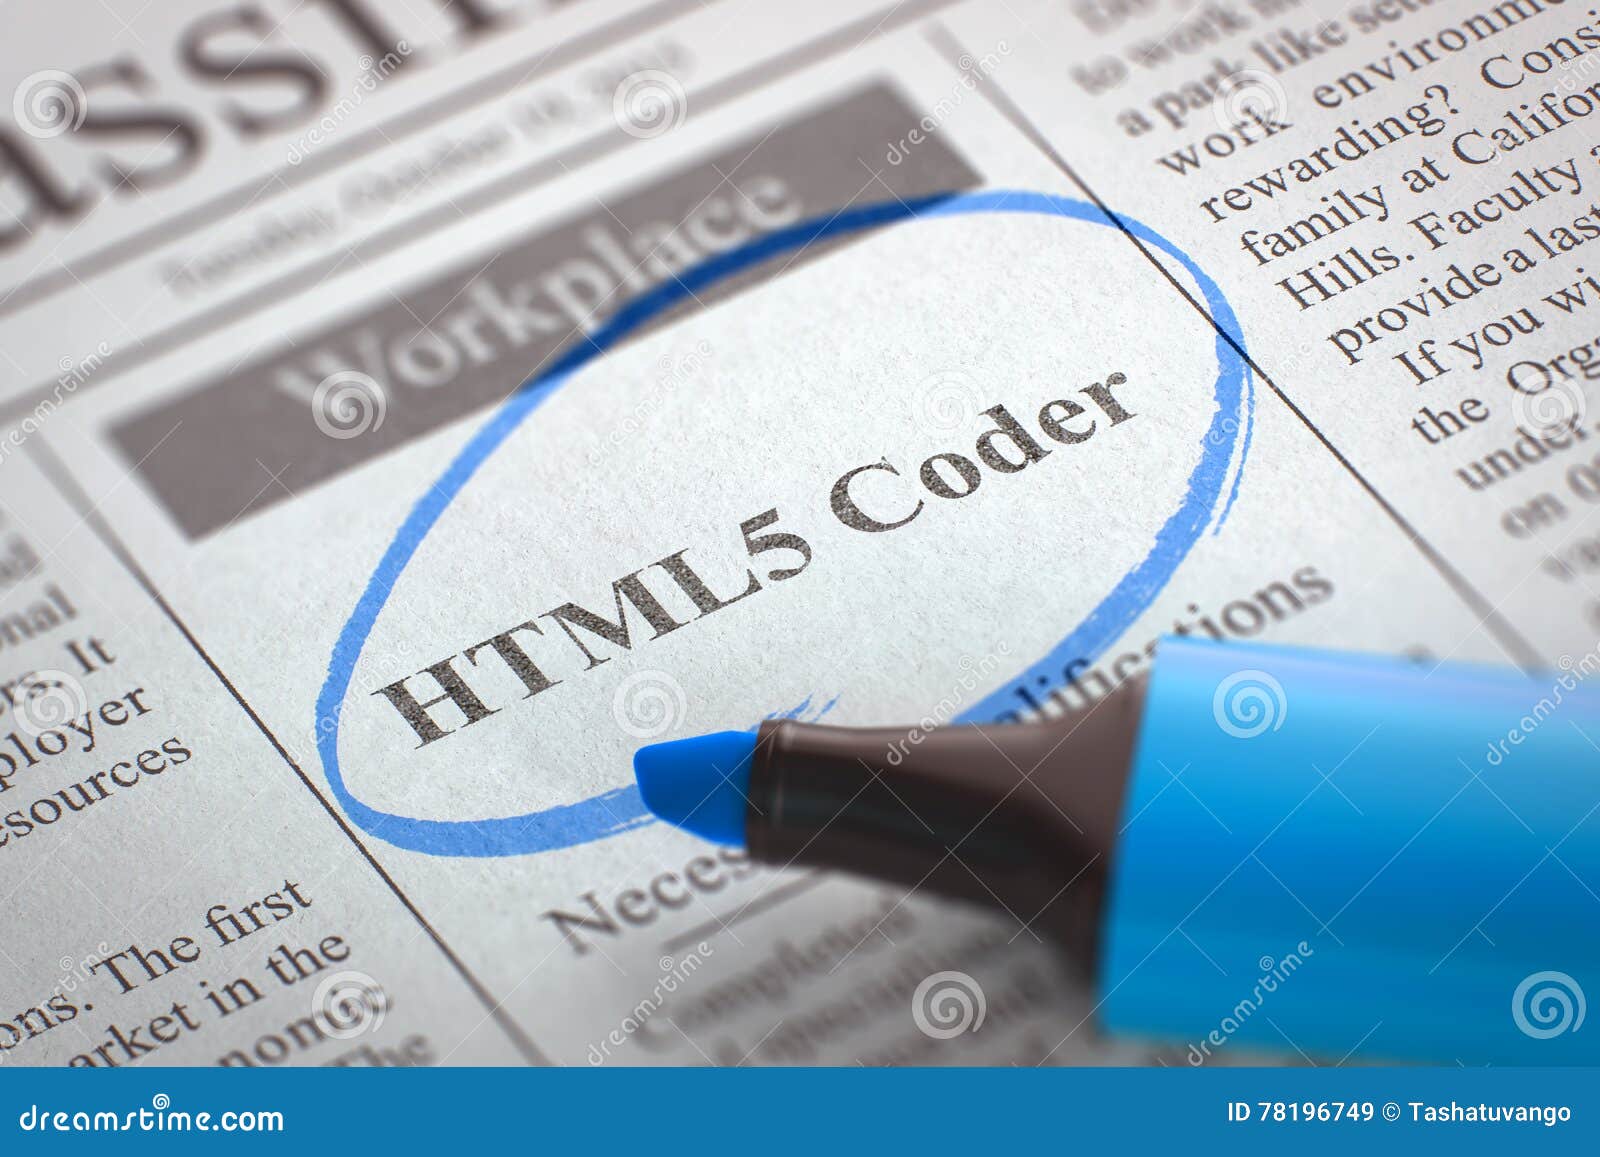 html5 coder join our team. 3d